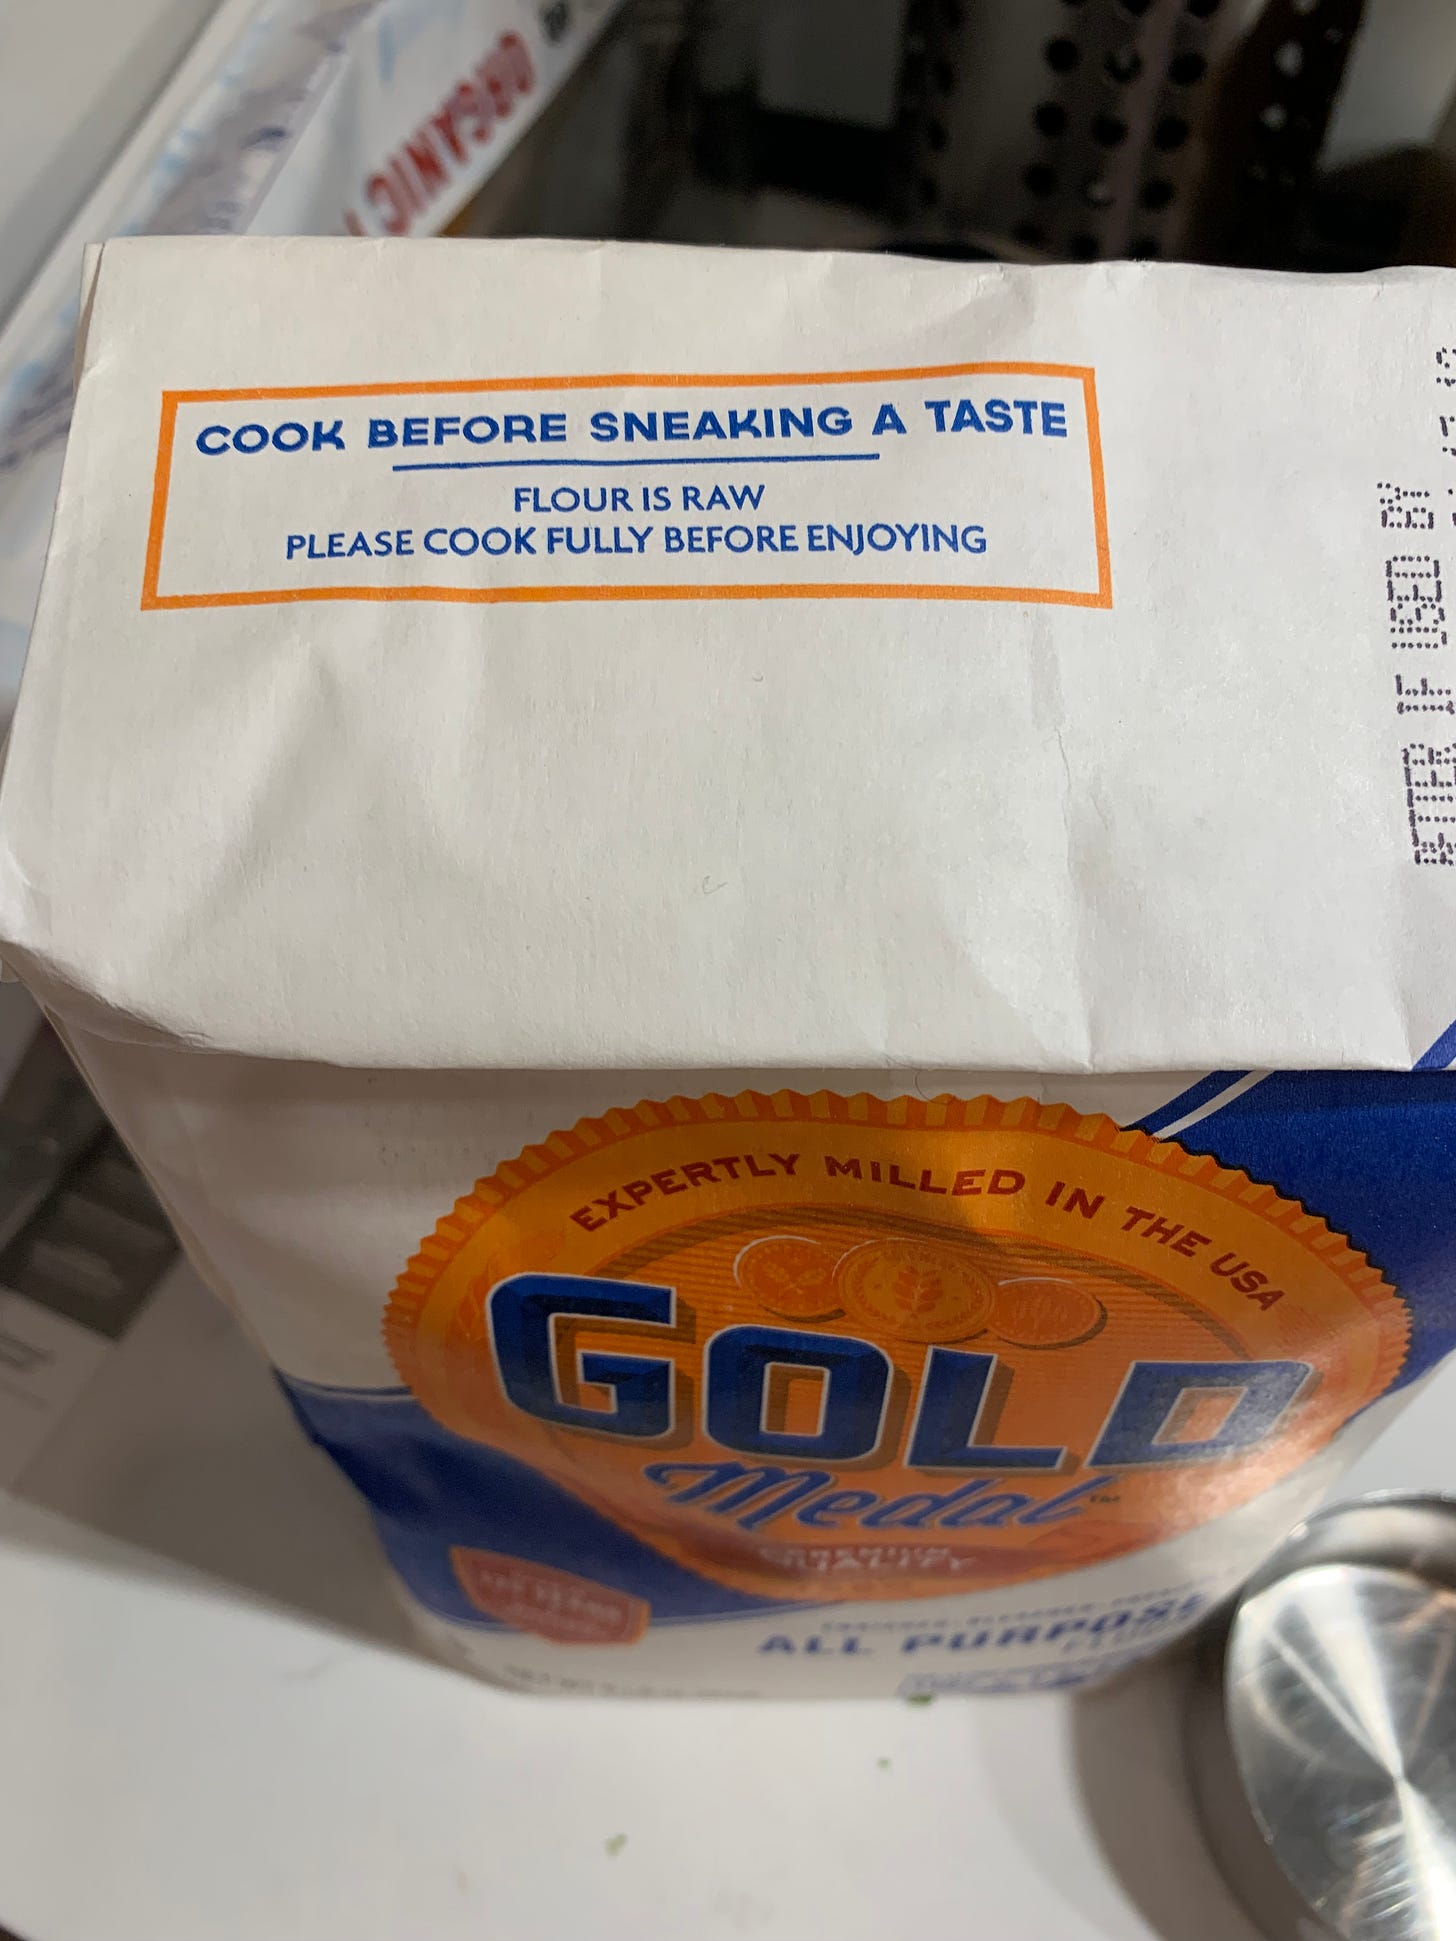 Picture shows a bag of Gold Medal All Purpose flower. On the top flap of the bag is printed "Cook before sneaking a taste. Flour is raw, please cook fully before enjoying."